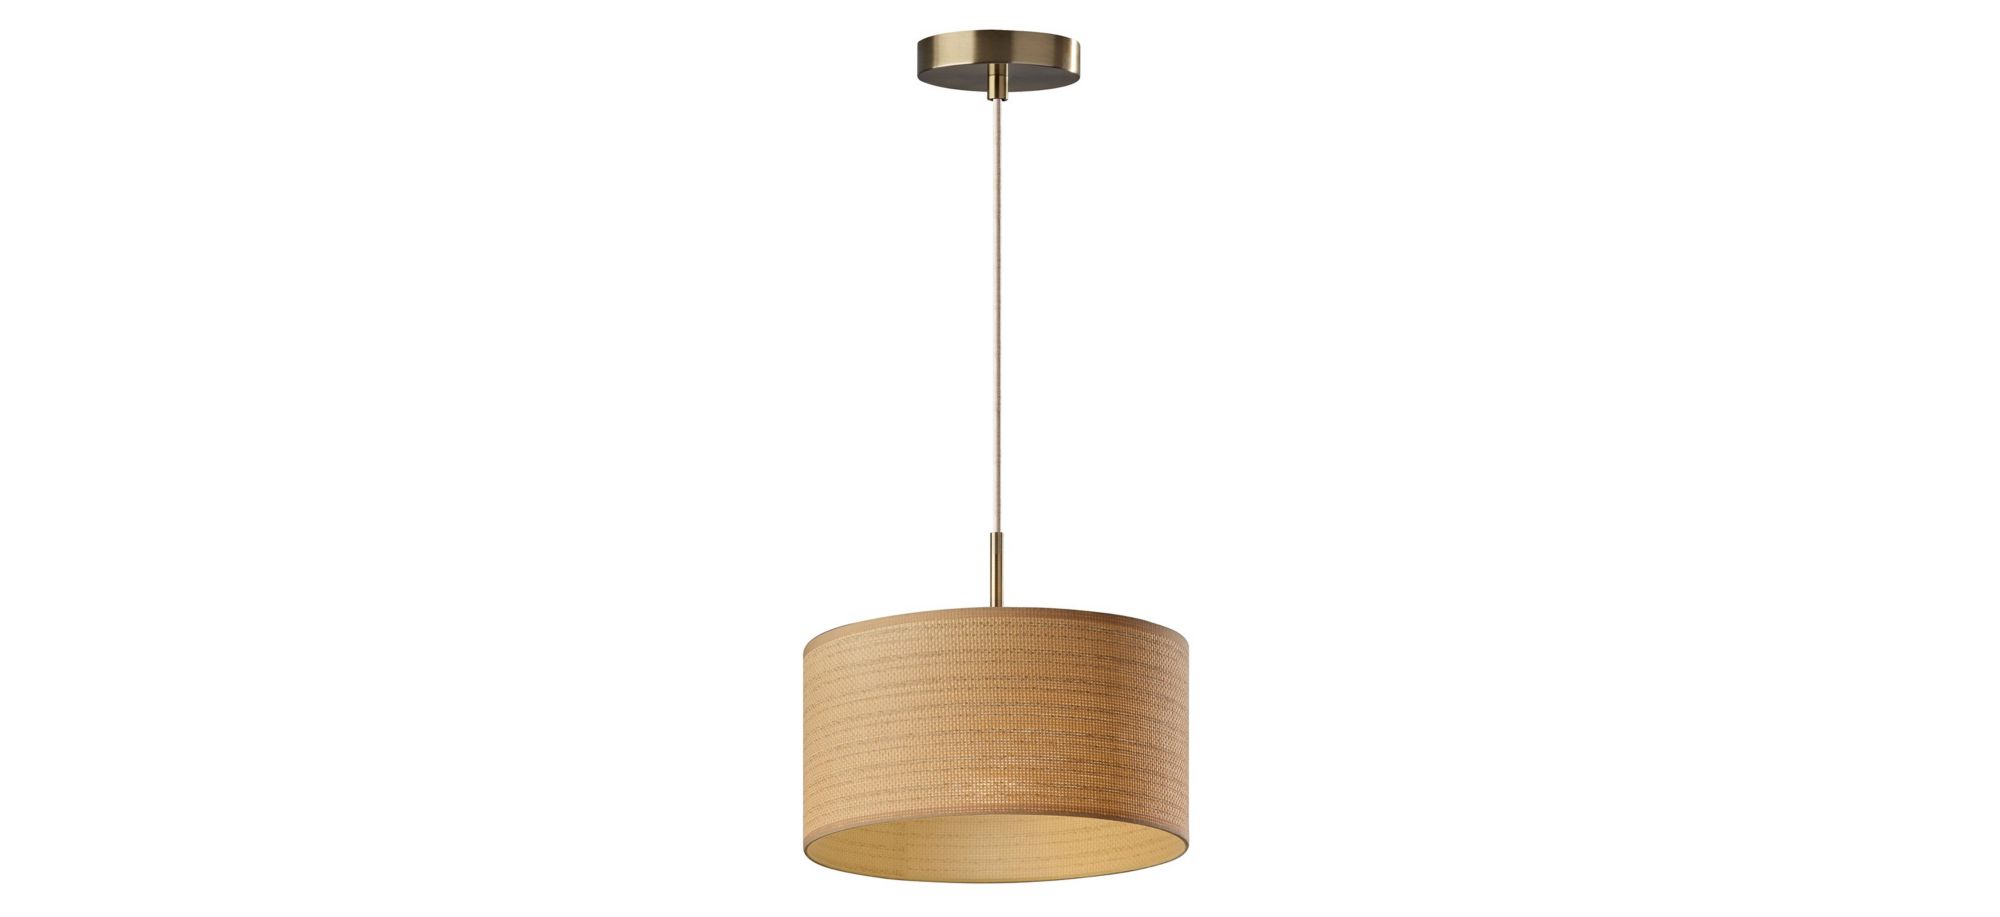 Harvest Pendant Light in Antique Brass by Adesso Inc